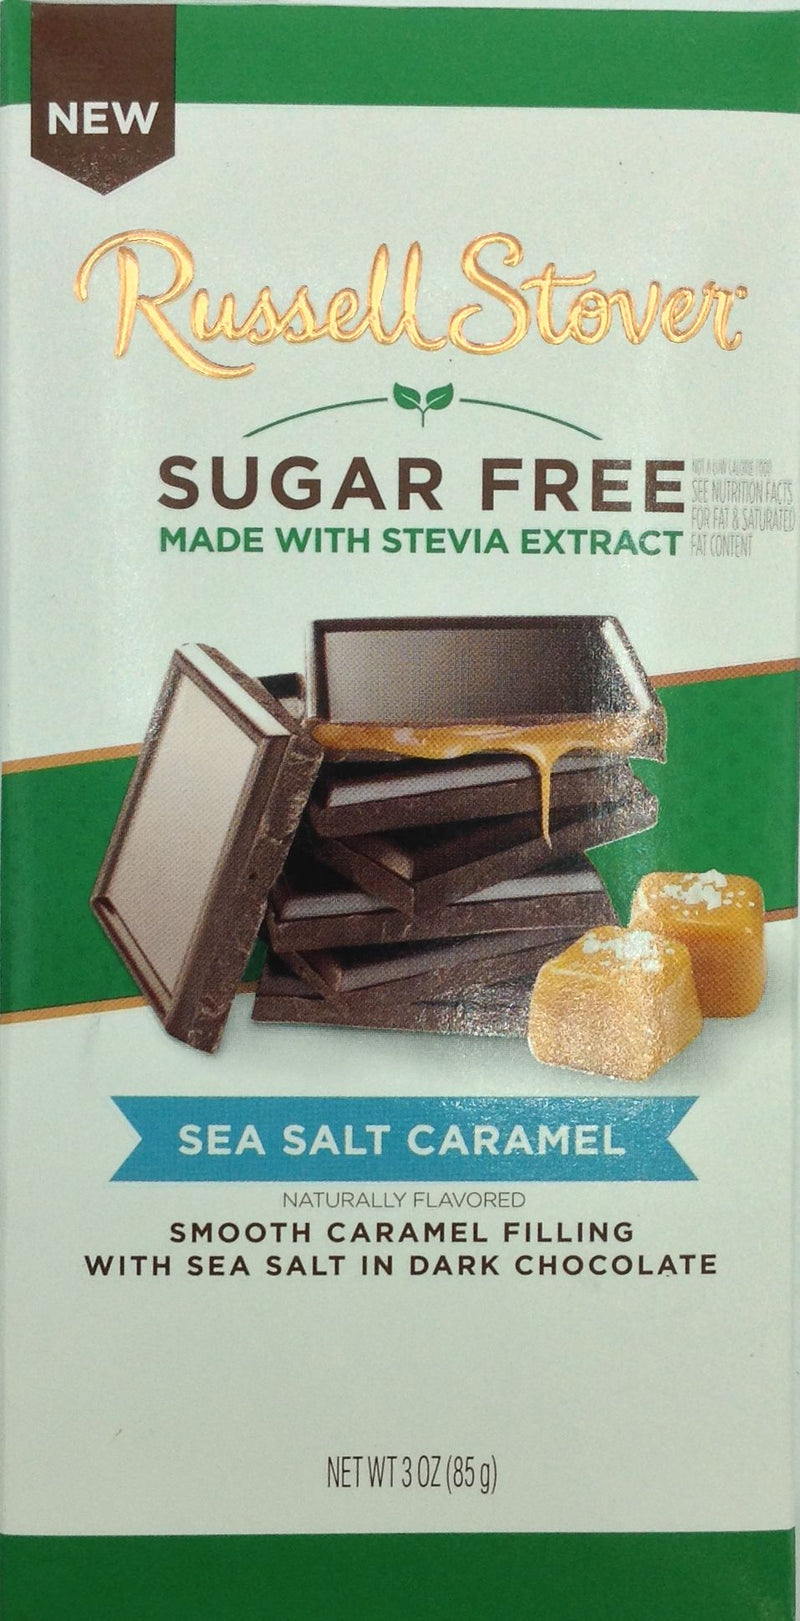 Russell Stover Sugar Free Candy Bars